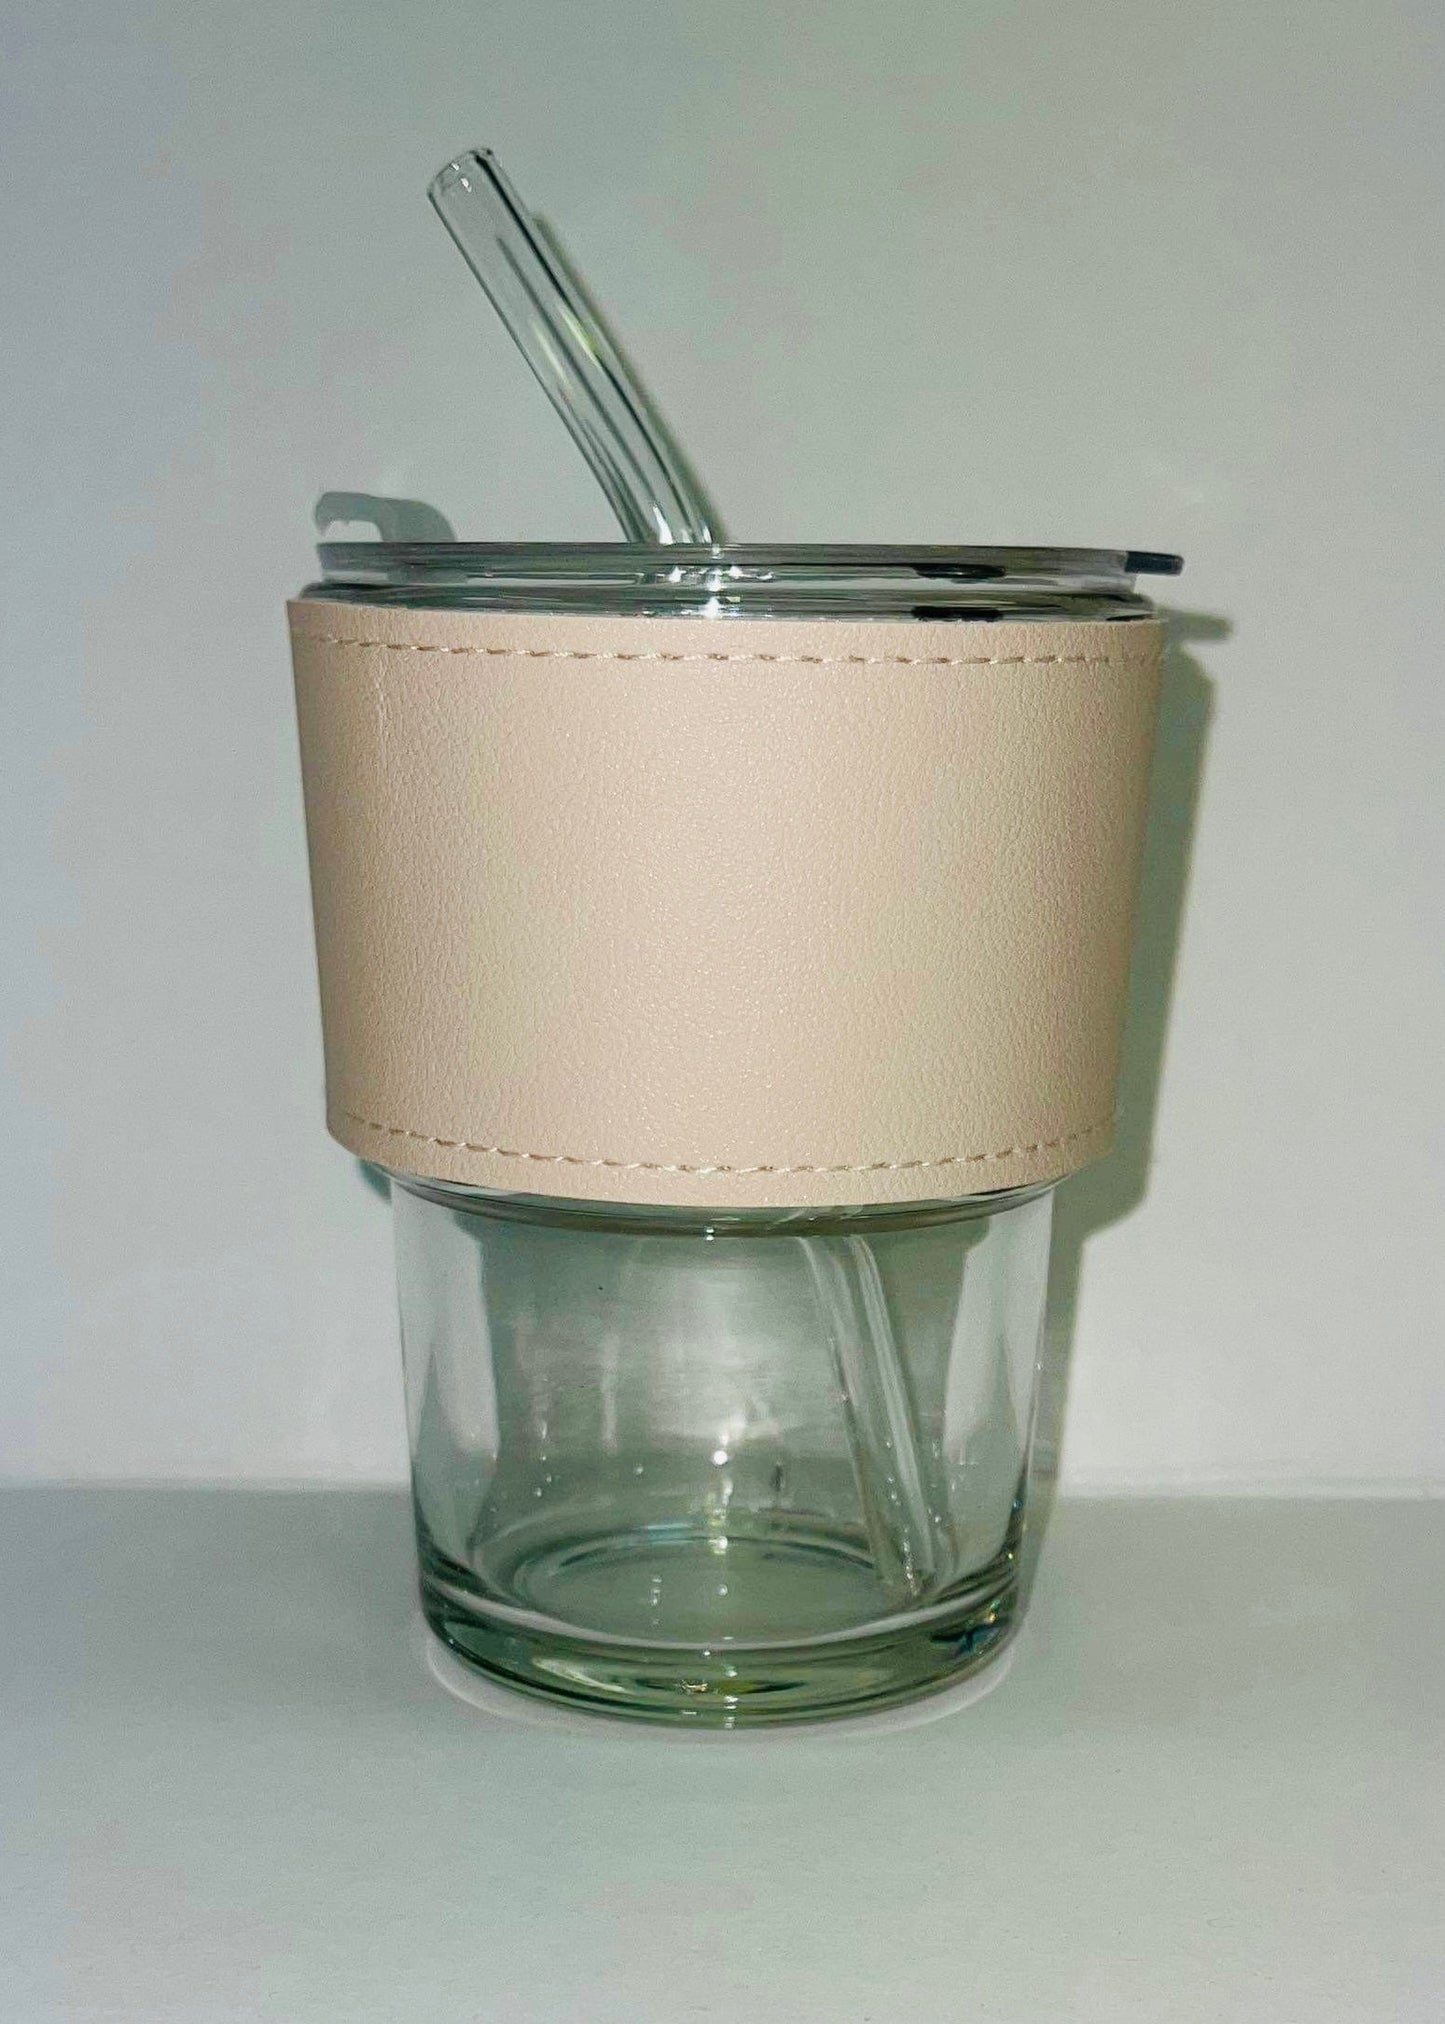 Glass Hot Cup with Sleeve (NO WRITING ON SLEEVE)